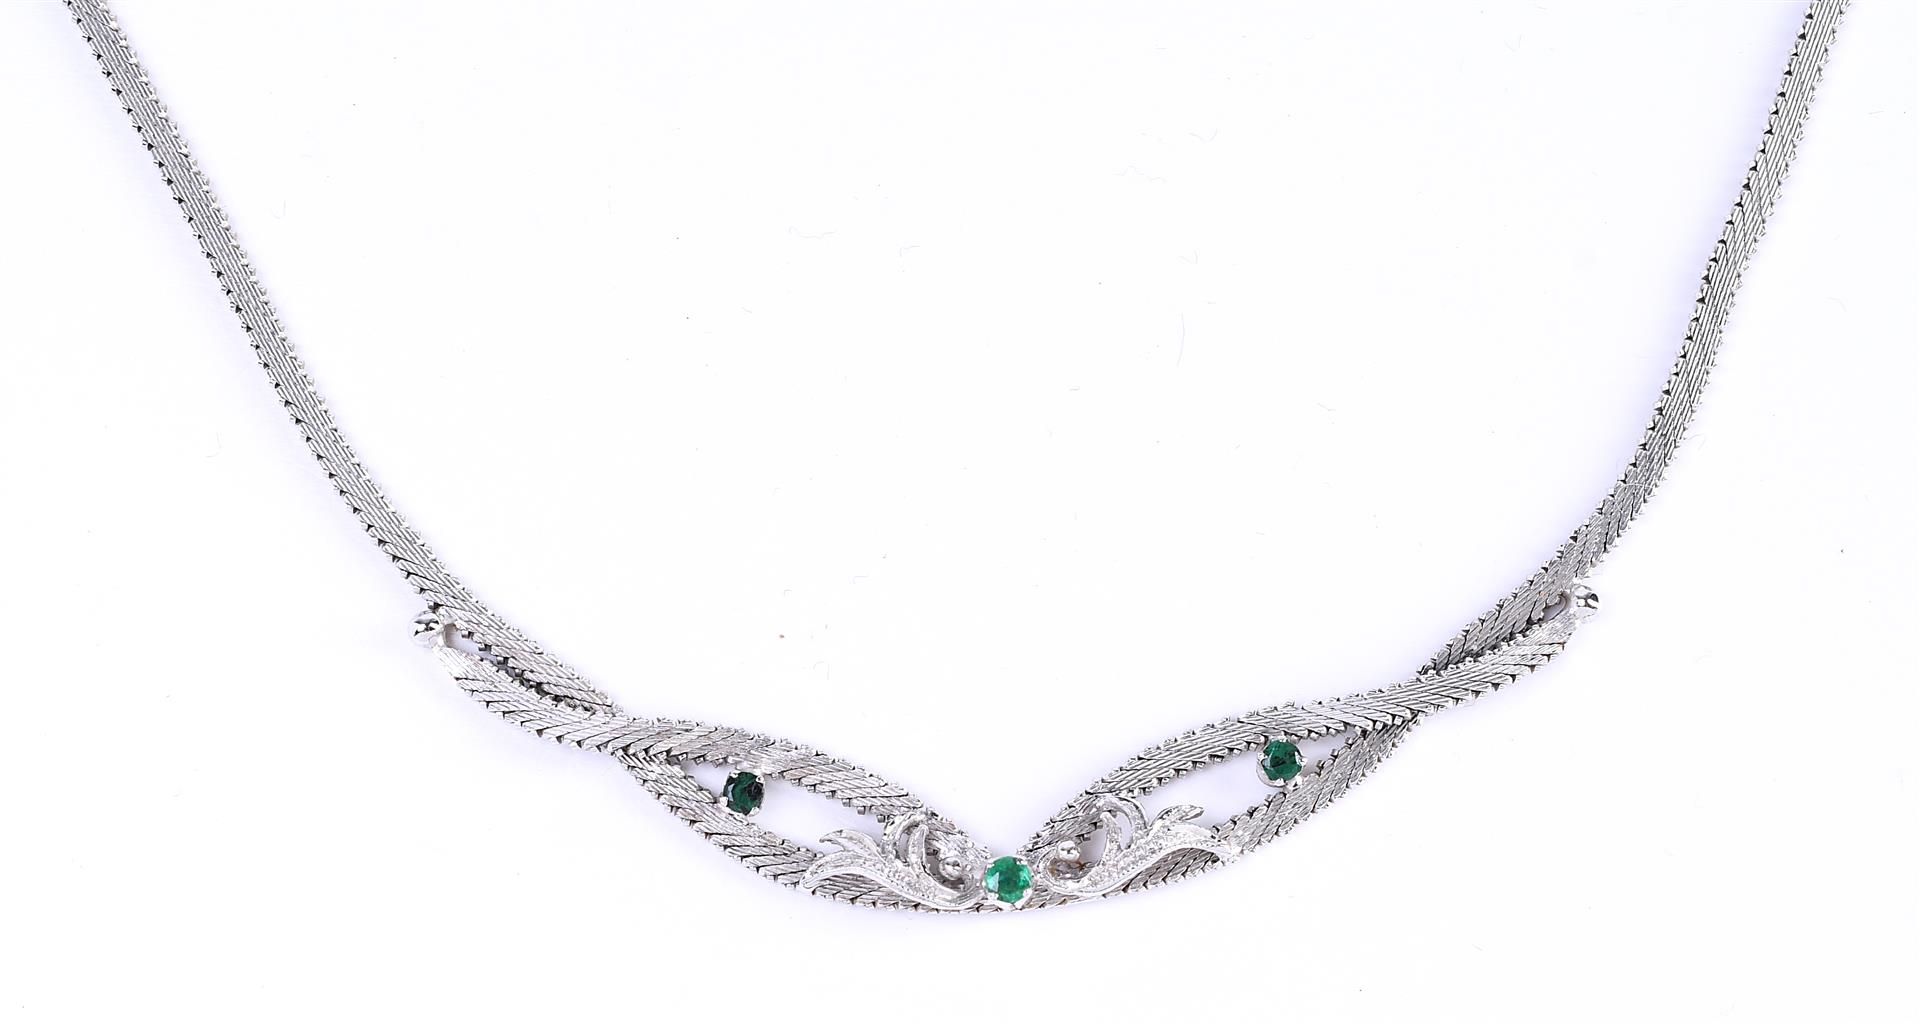 14 carat white gold women's choker necklace with a sliding clasp with extra safety figure